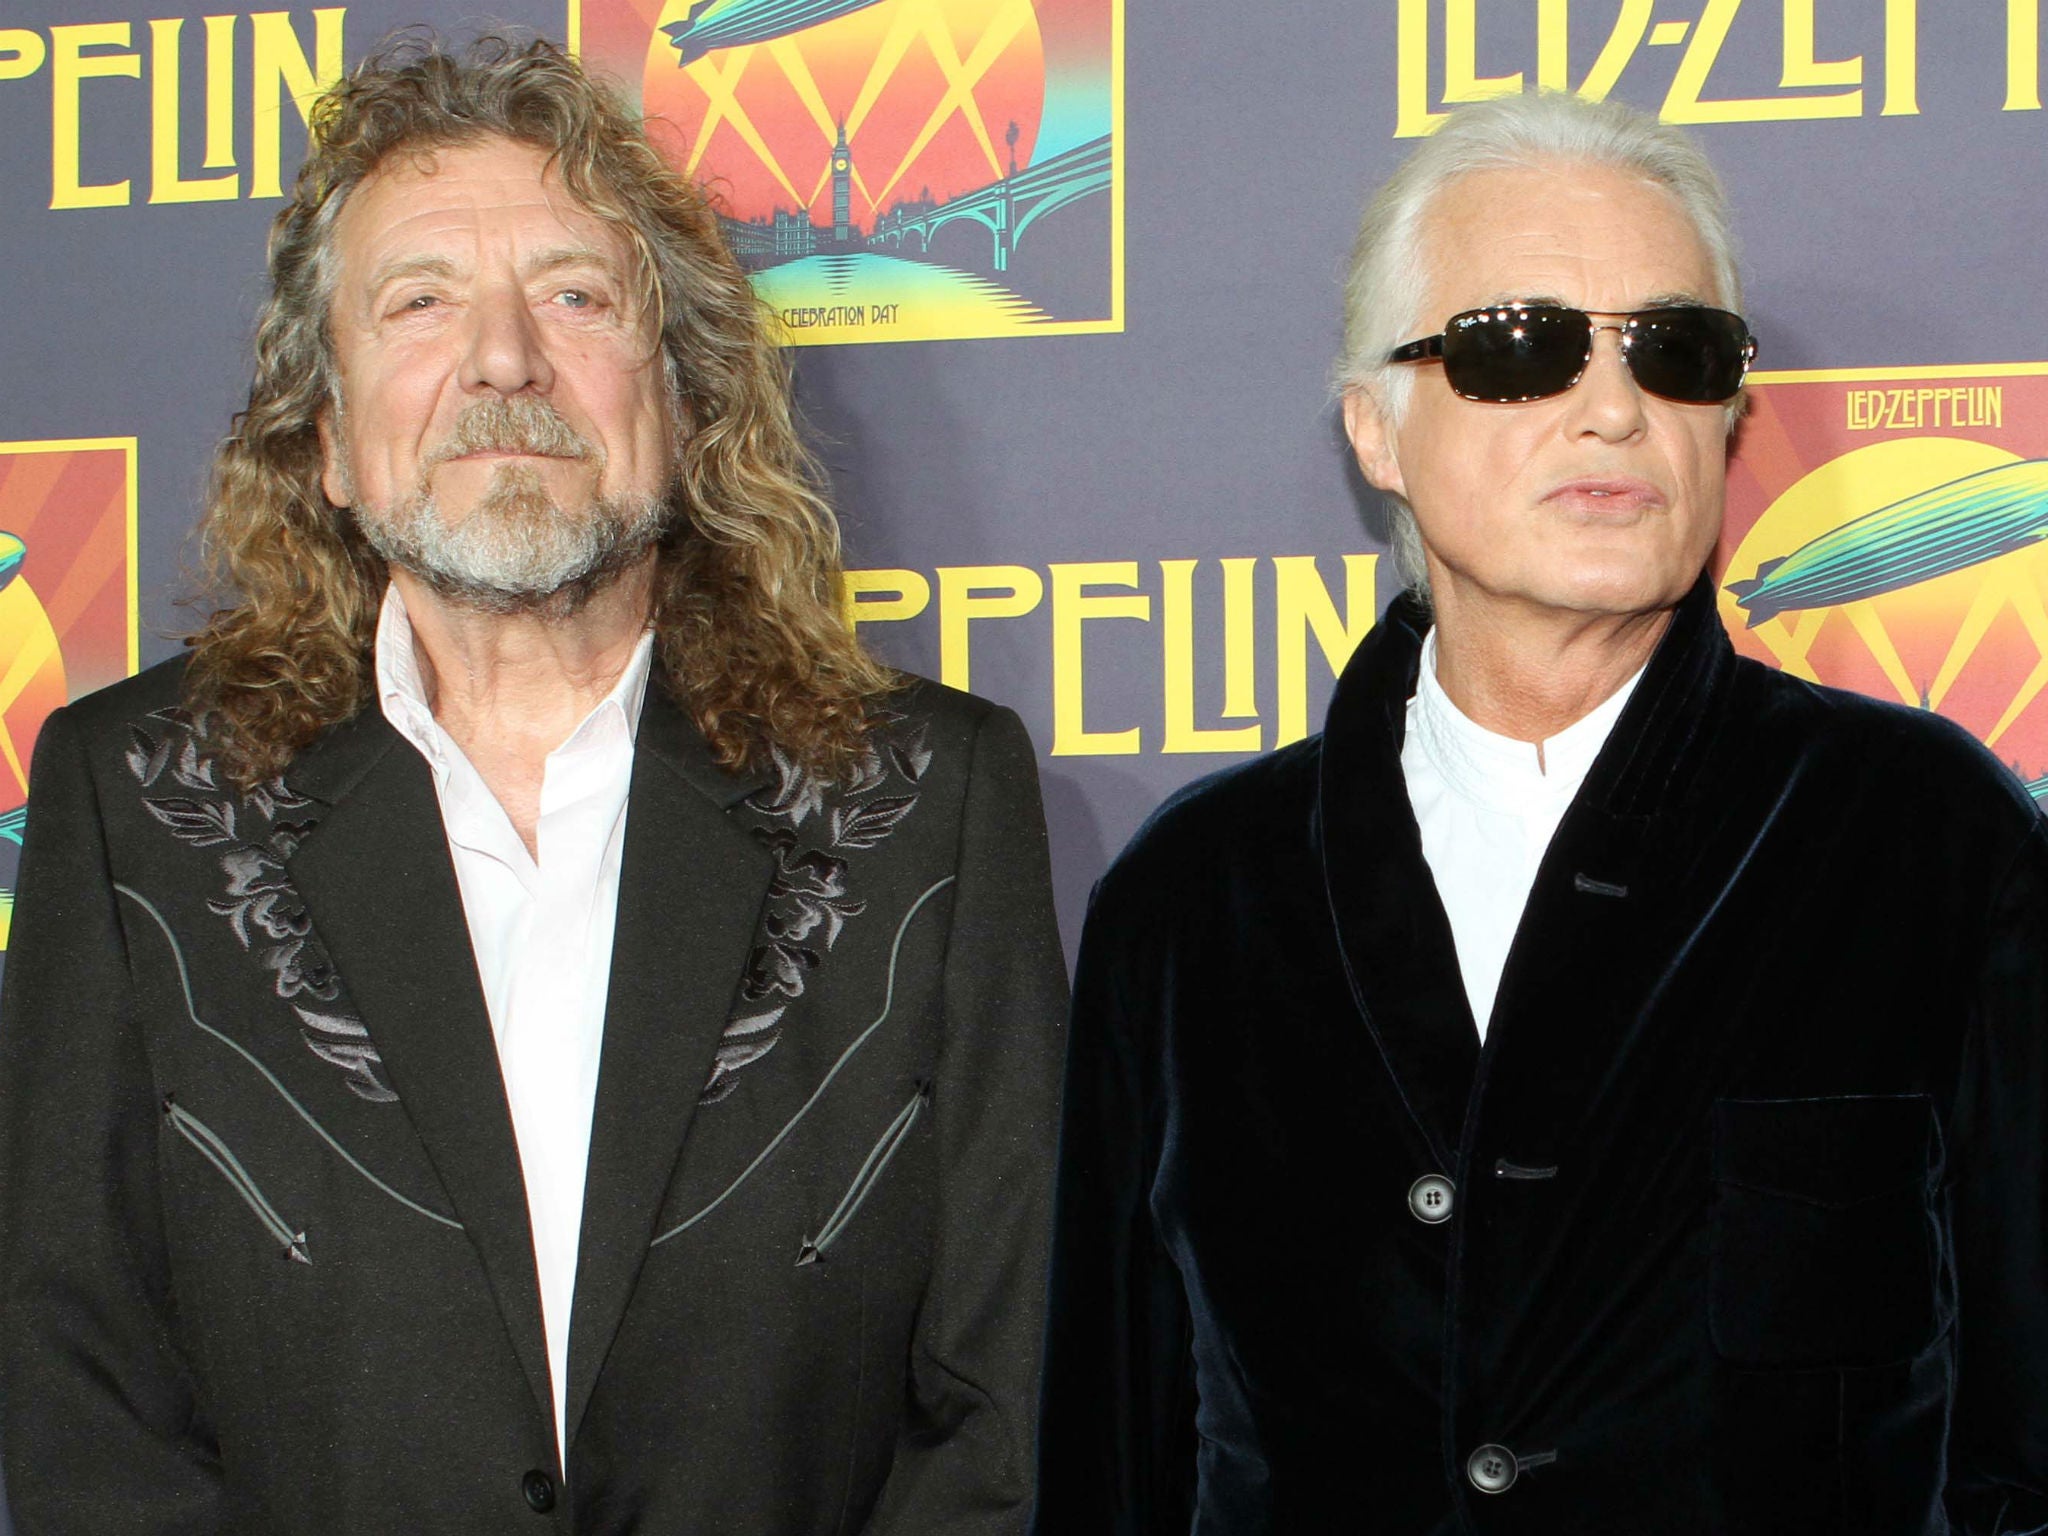 Led Zeppelin trial: Robert Plant and Jimmy Page have 'rewritten